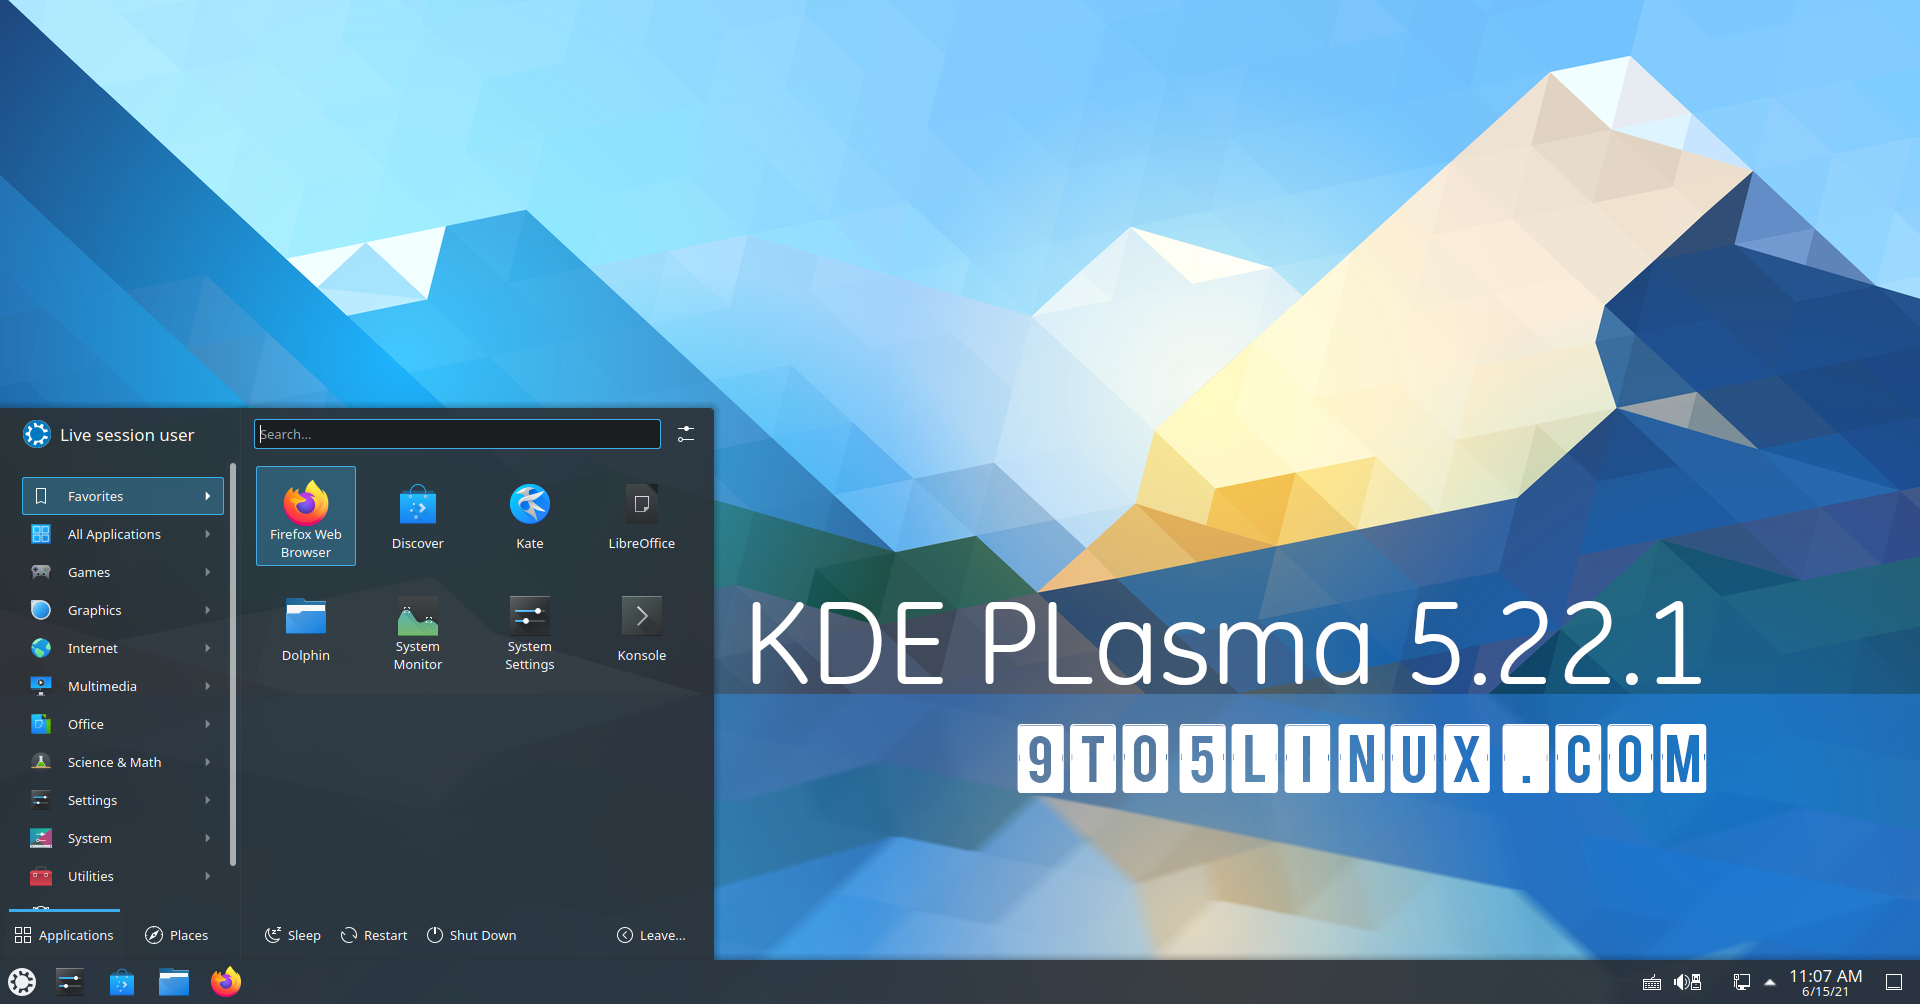 First KDE Plasma 5.22 Point Release Improves the Wayland Session for NVIDIA/AMD Systems